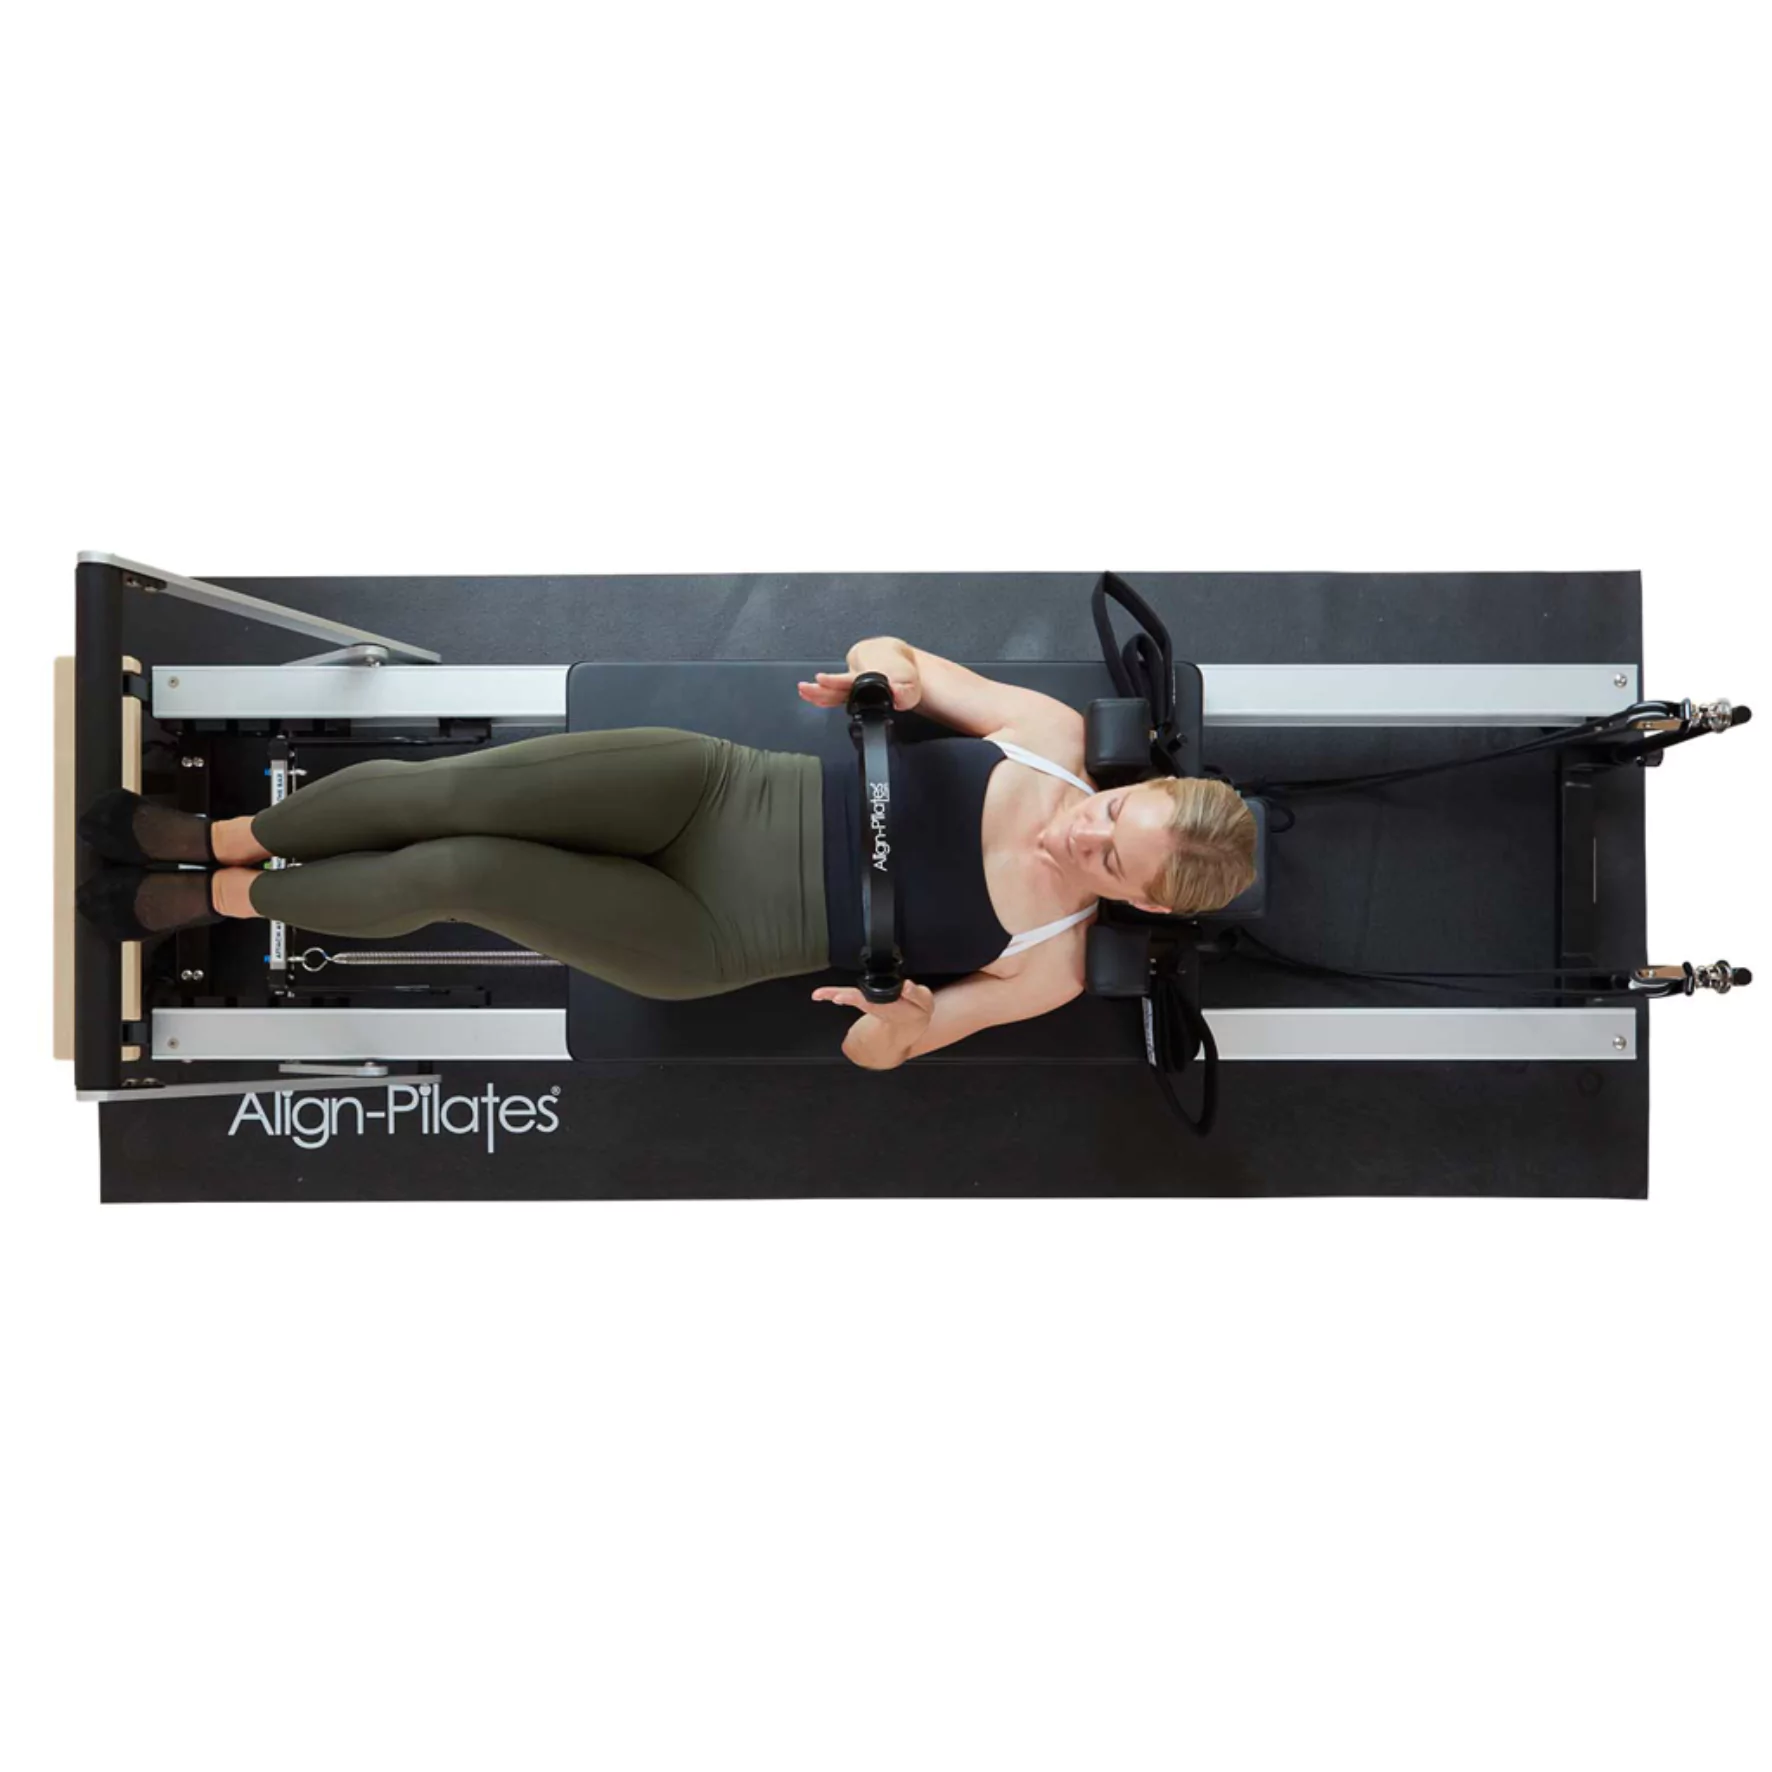 Fitness Town Pilates Mat with eyelets - Fitness Town